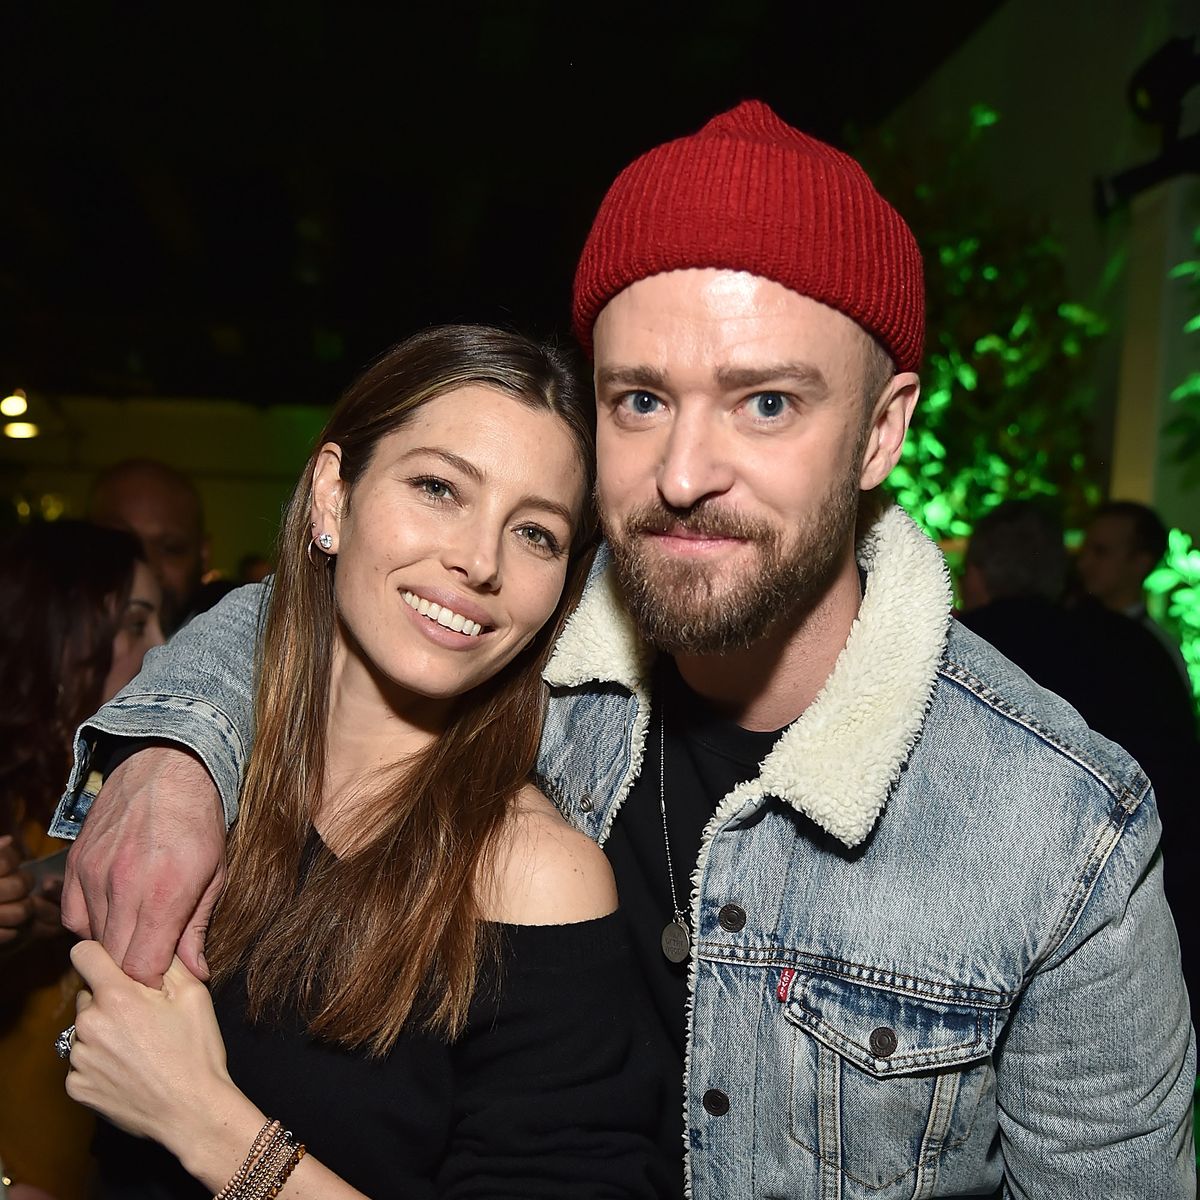 American Express x Justin Timberlake 'Man Of The Woods' Listening Session at Clarkson Square